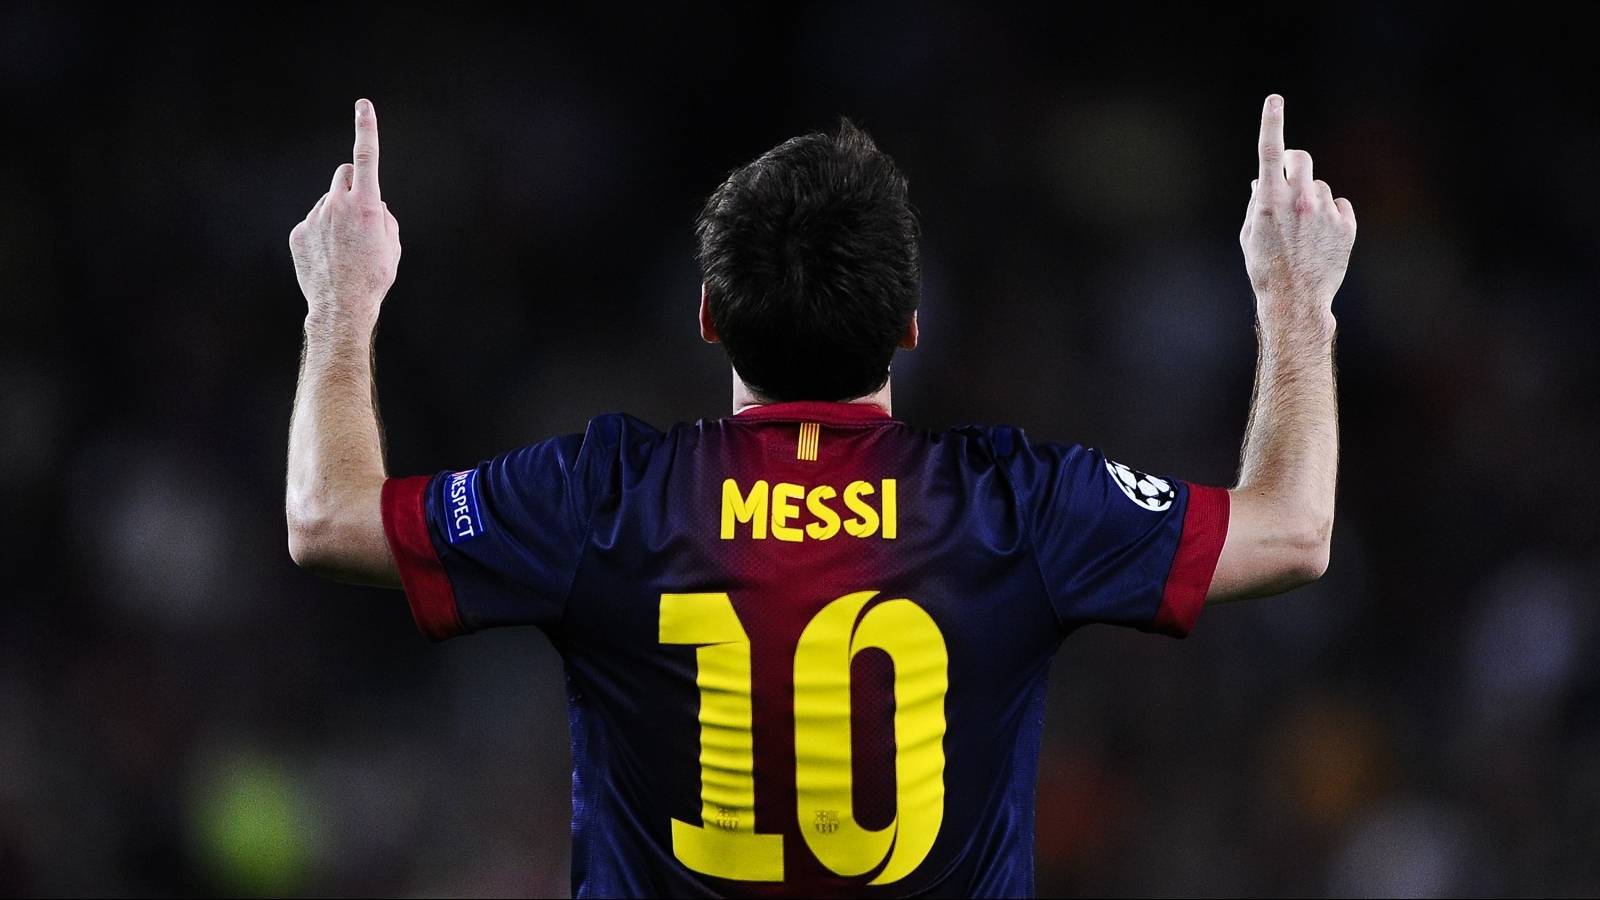 lionel andres messi, people, sports, men, football, black QHD